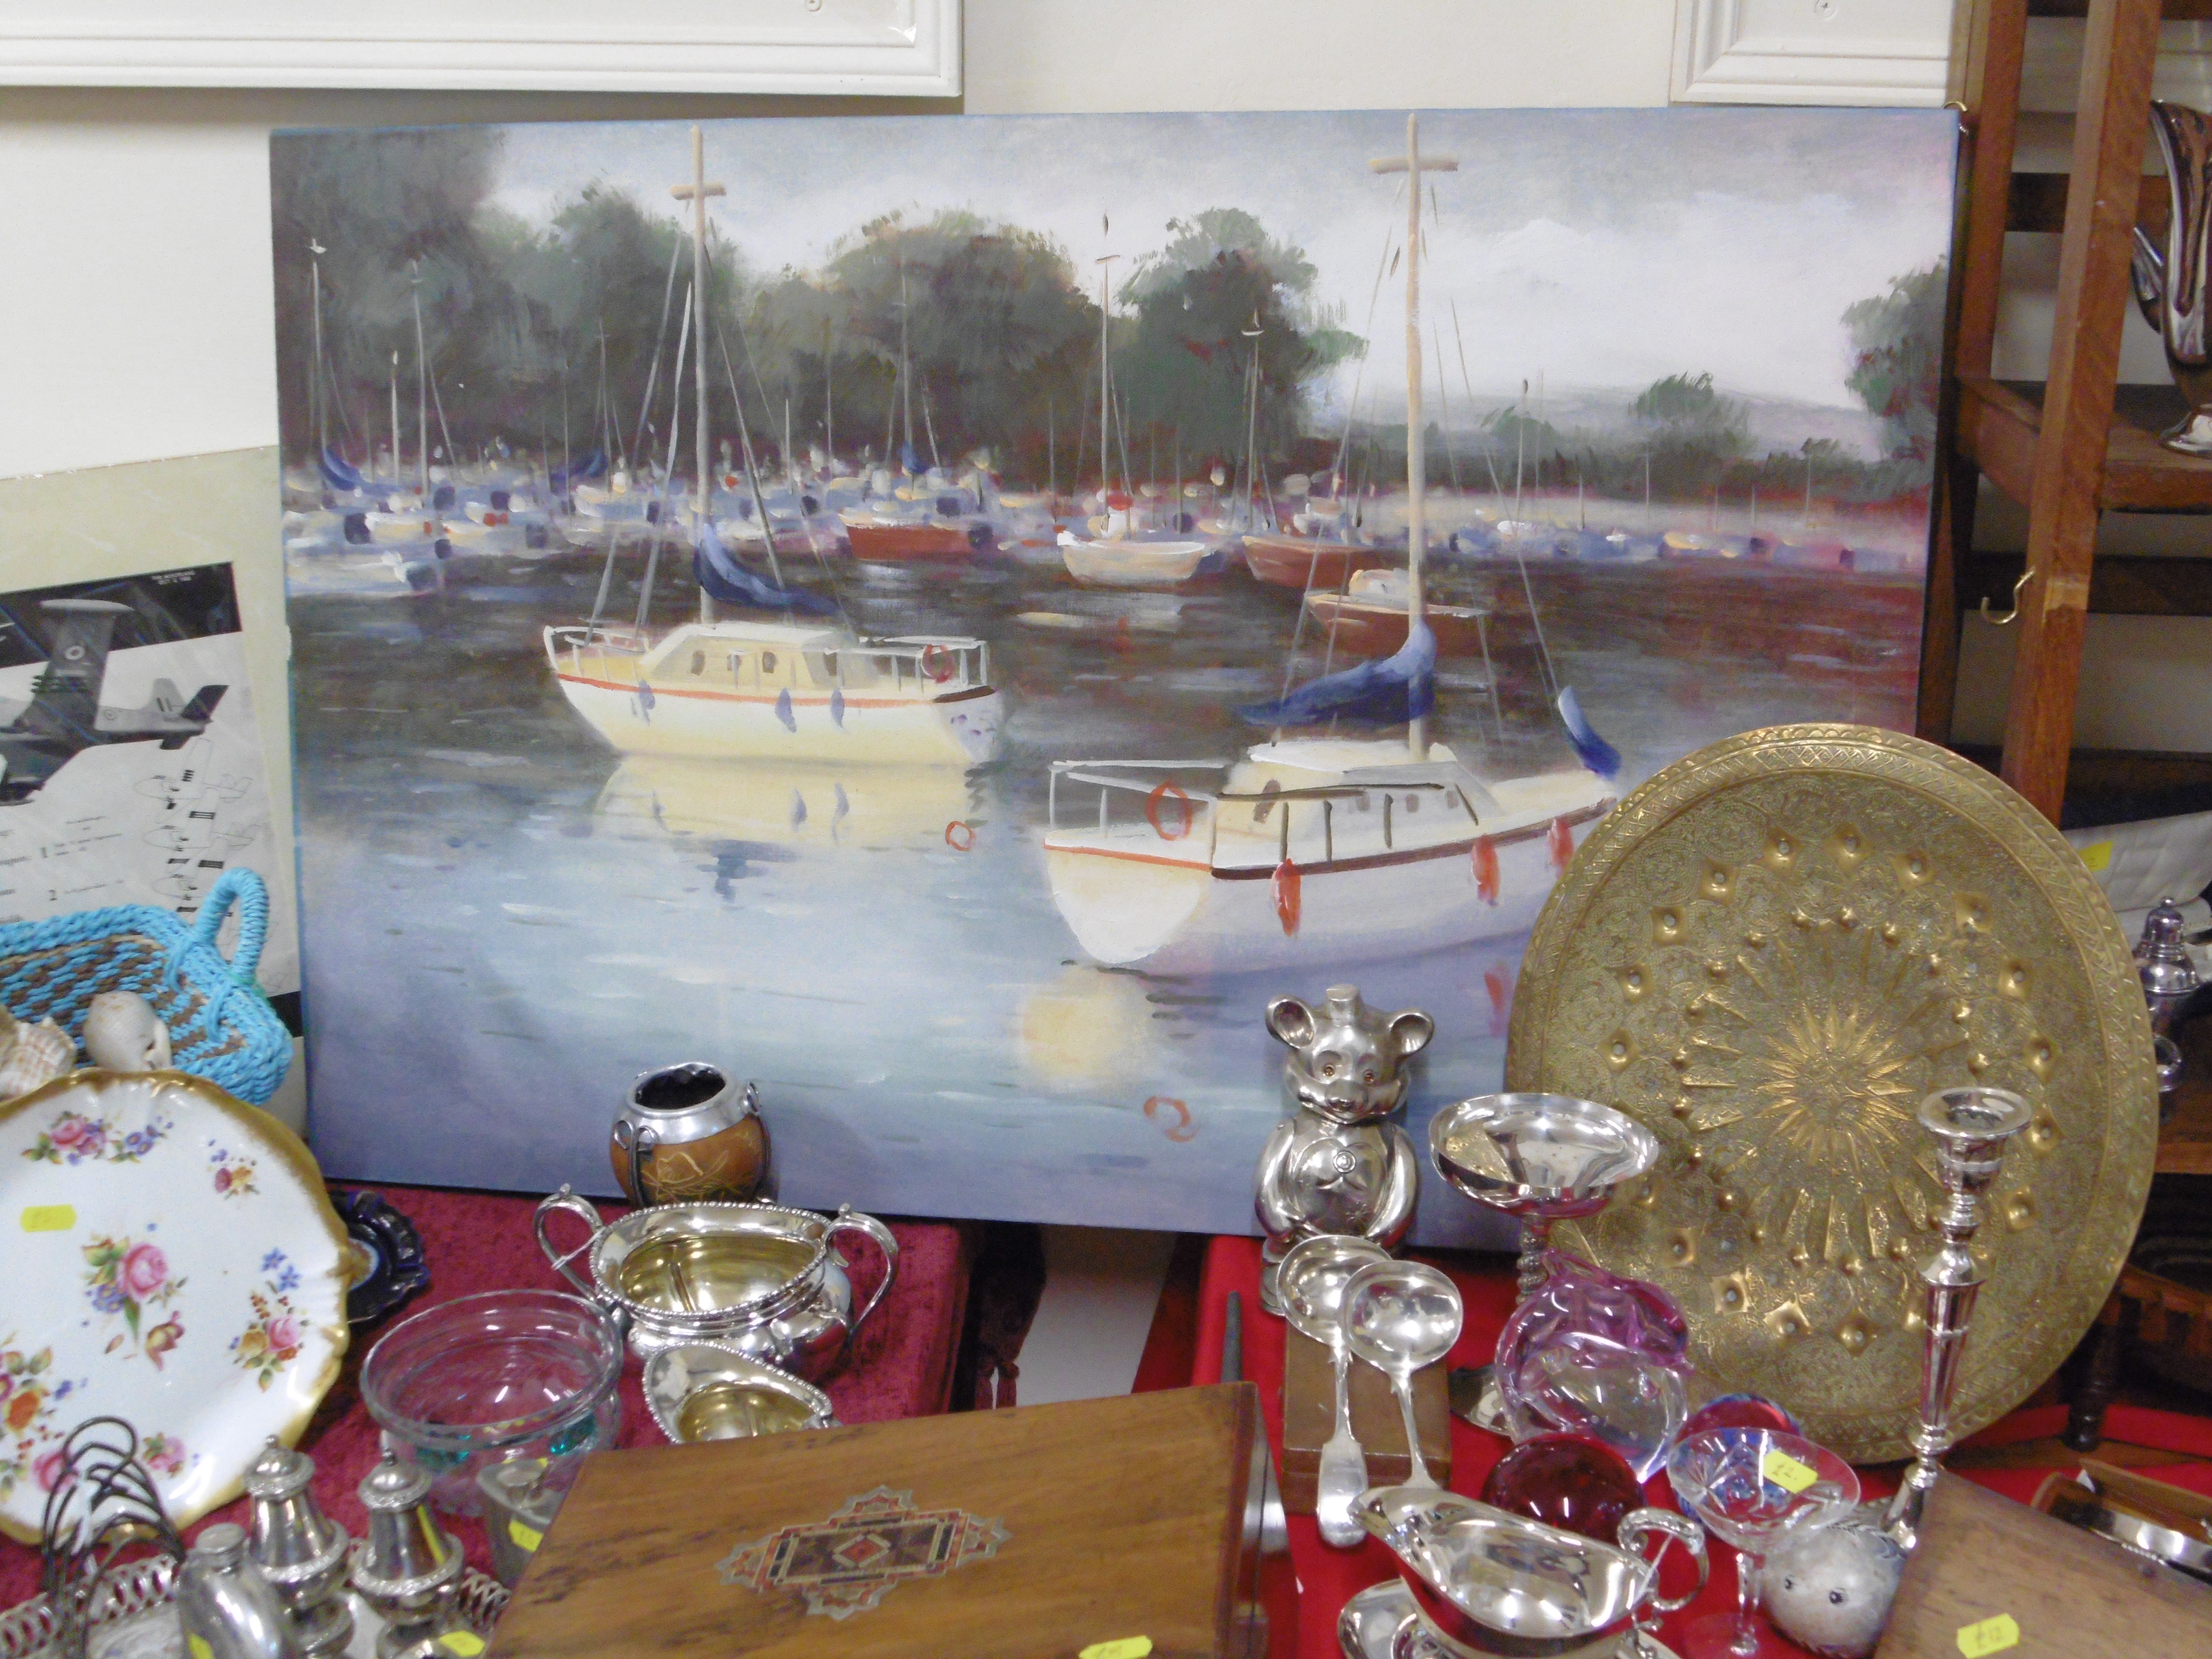 Modern picture of boats on an estuary, we sell antiques and collectables!
